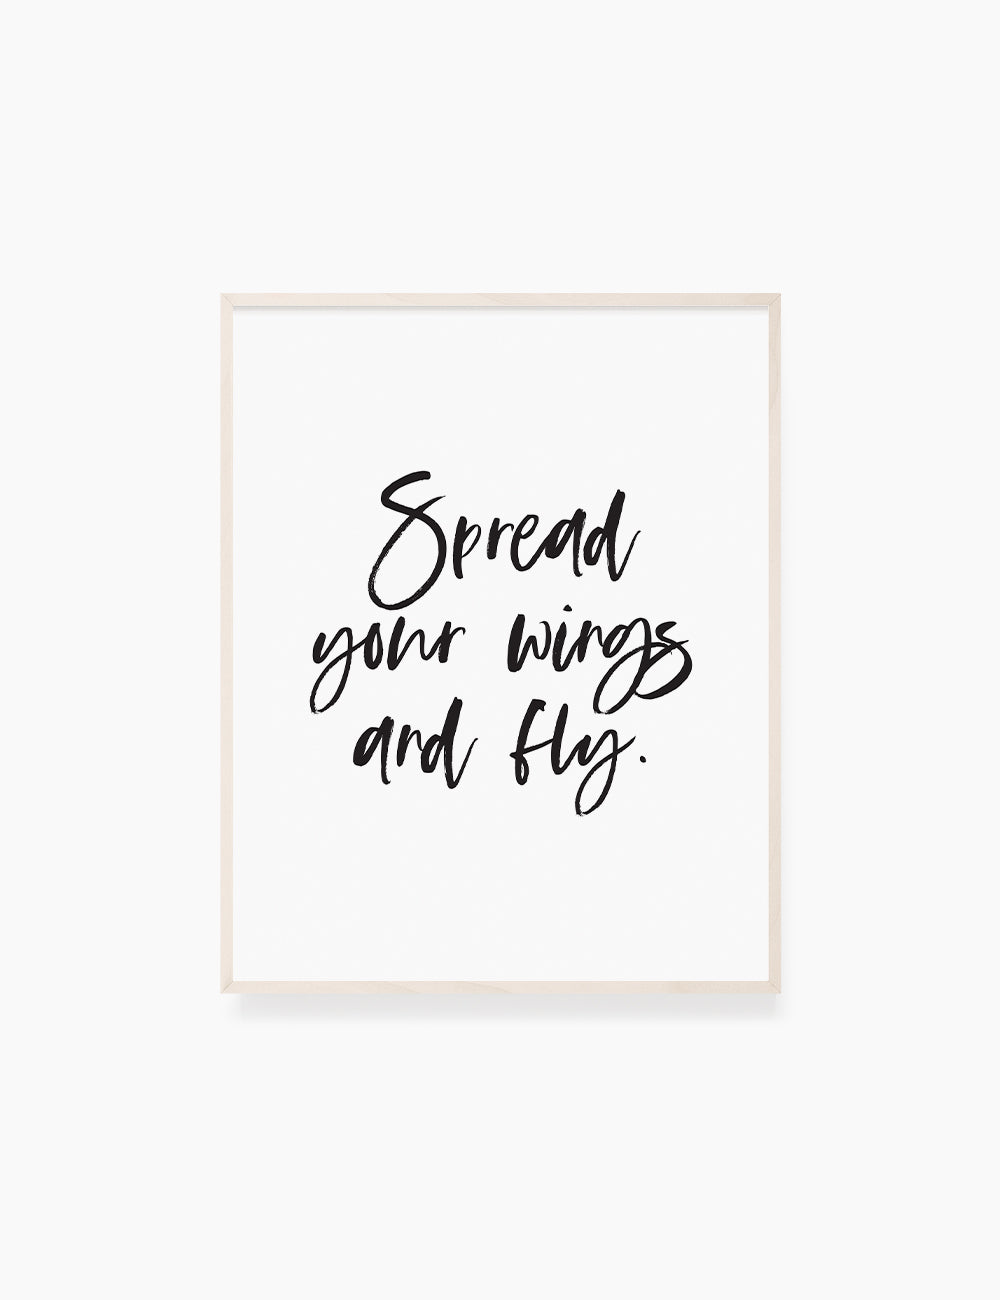 Printable Wall Art Quote: SPREAD YOUR WINGS AND FLY. Printable Poster. Inspirational Quote. Motivational Quote. WA008 - Paper Moon Art & Design